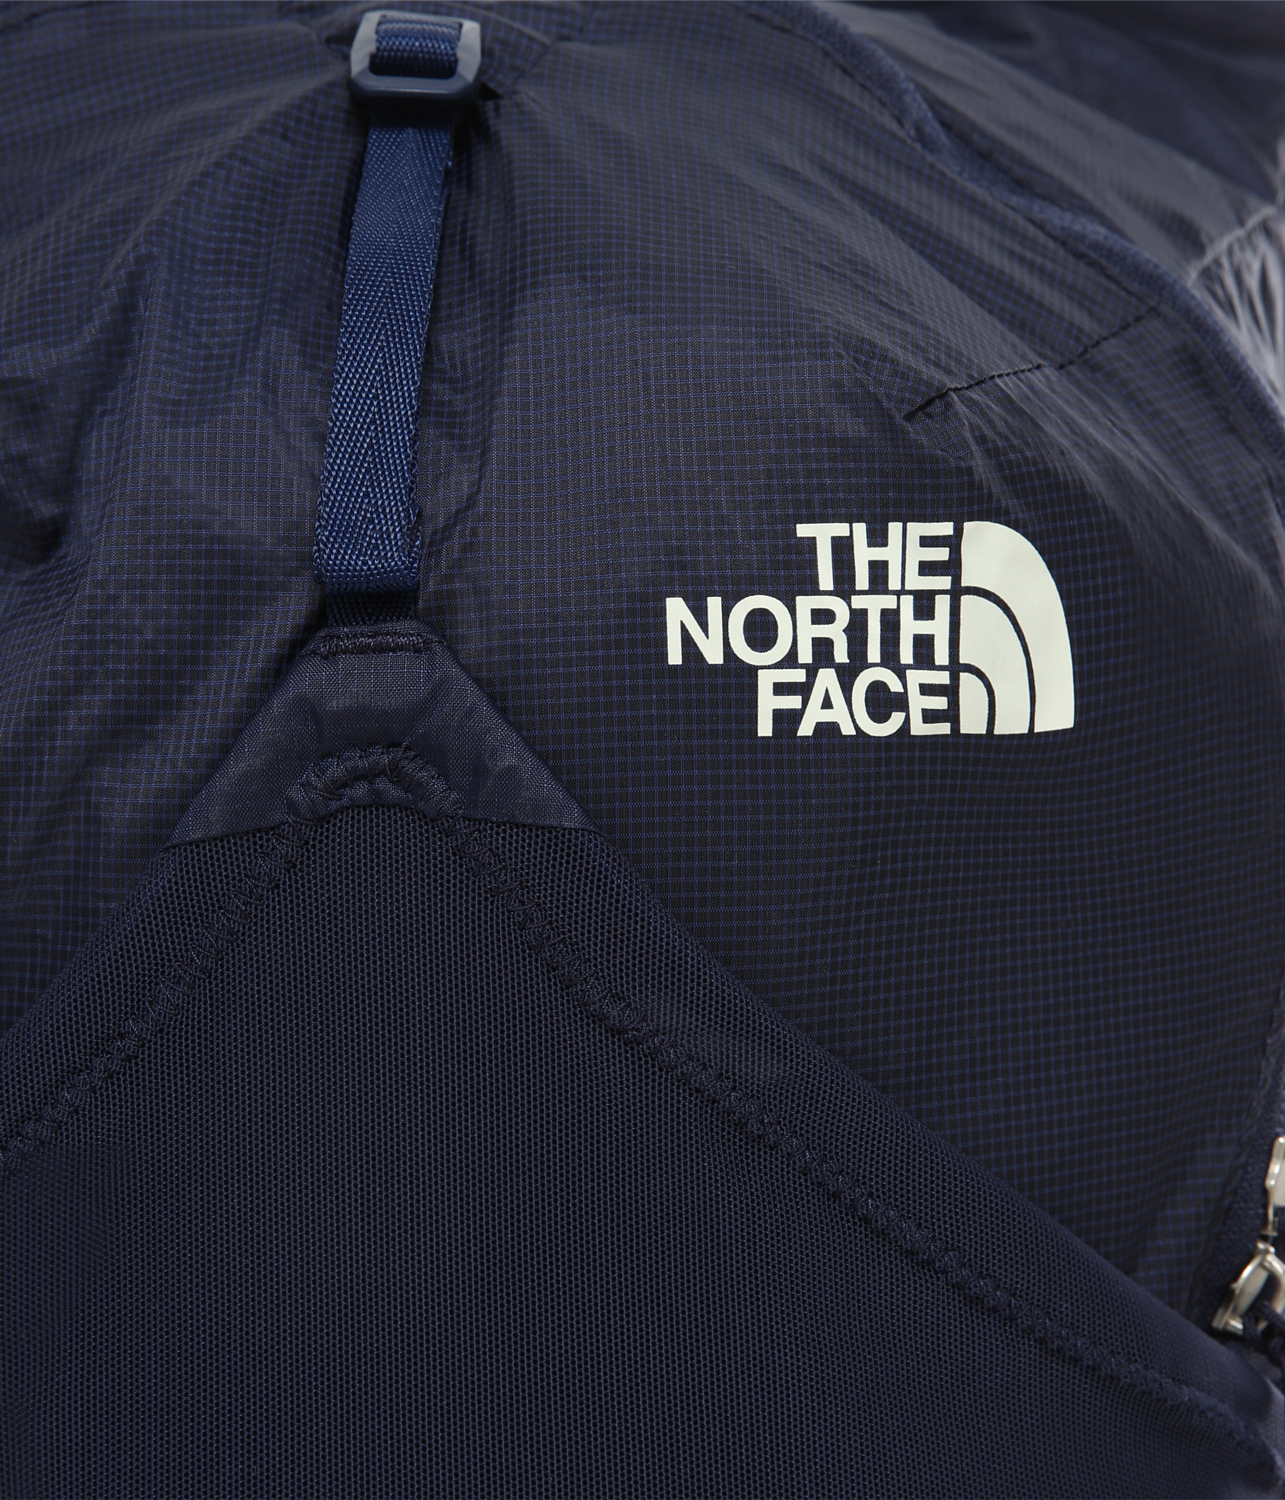 Рюкзак The North Face Flyweight Pack Montague Blue/Vintage White